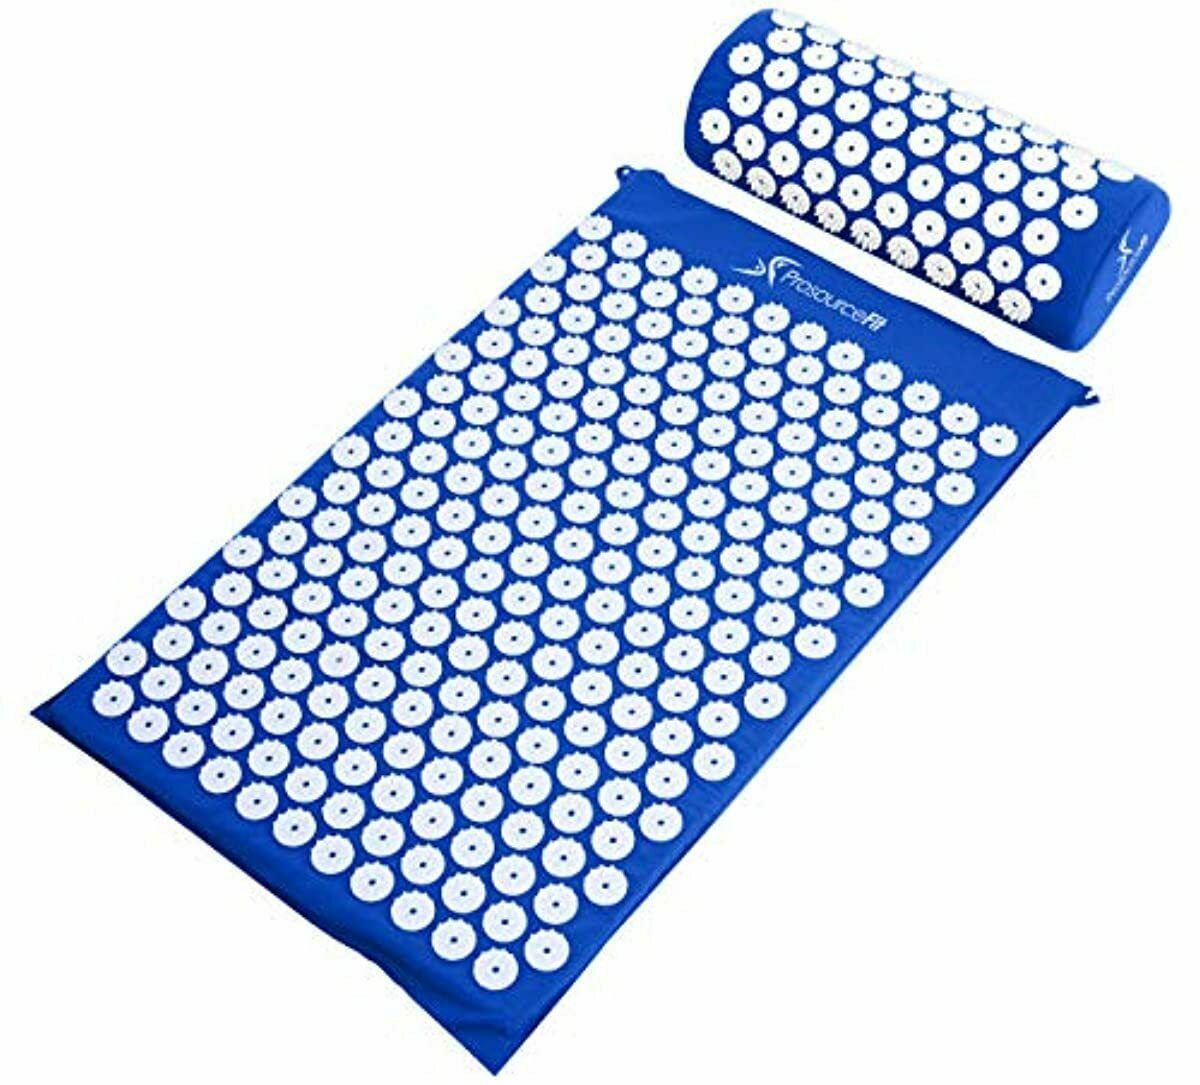 Prosourcefit Acupressure Mat And Pillow Set For Back/neck Pain Relief And Muscle